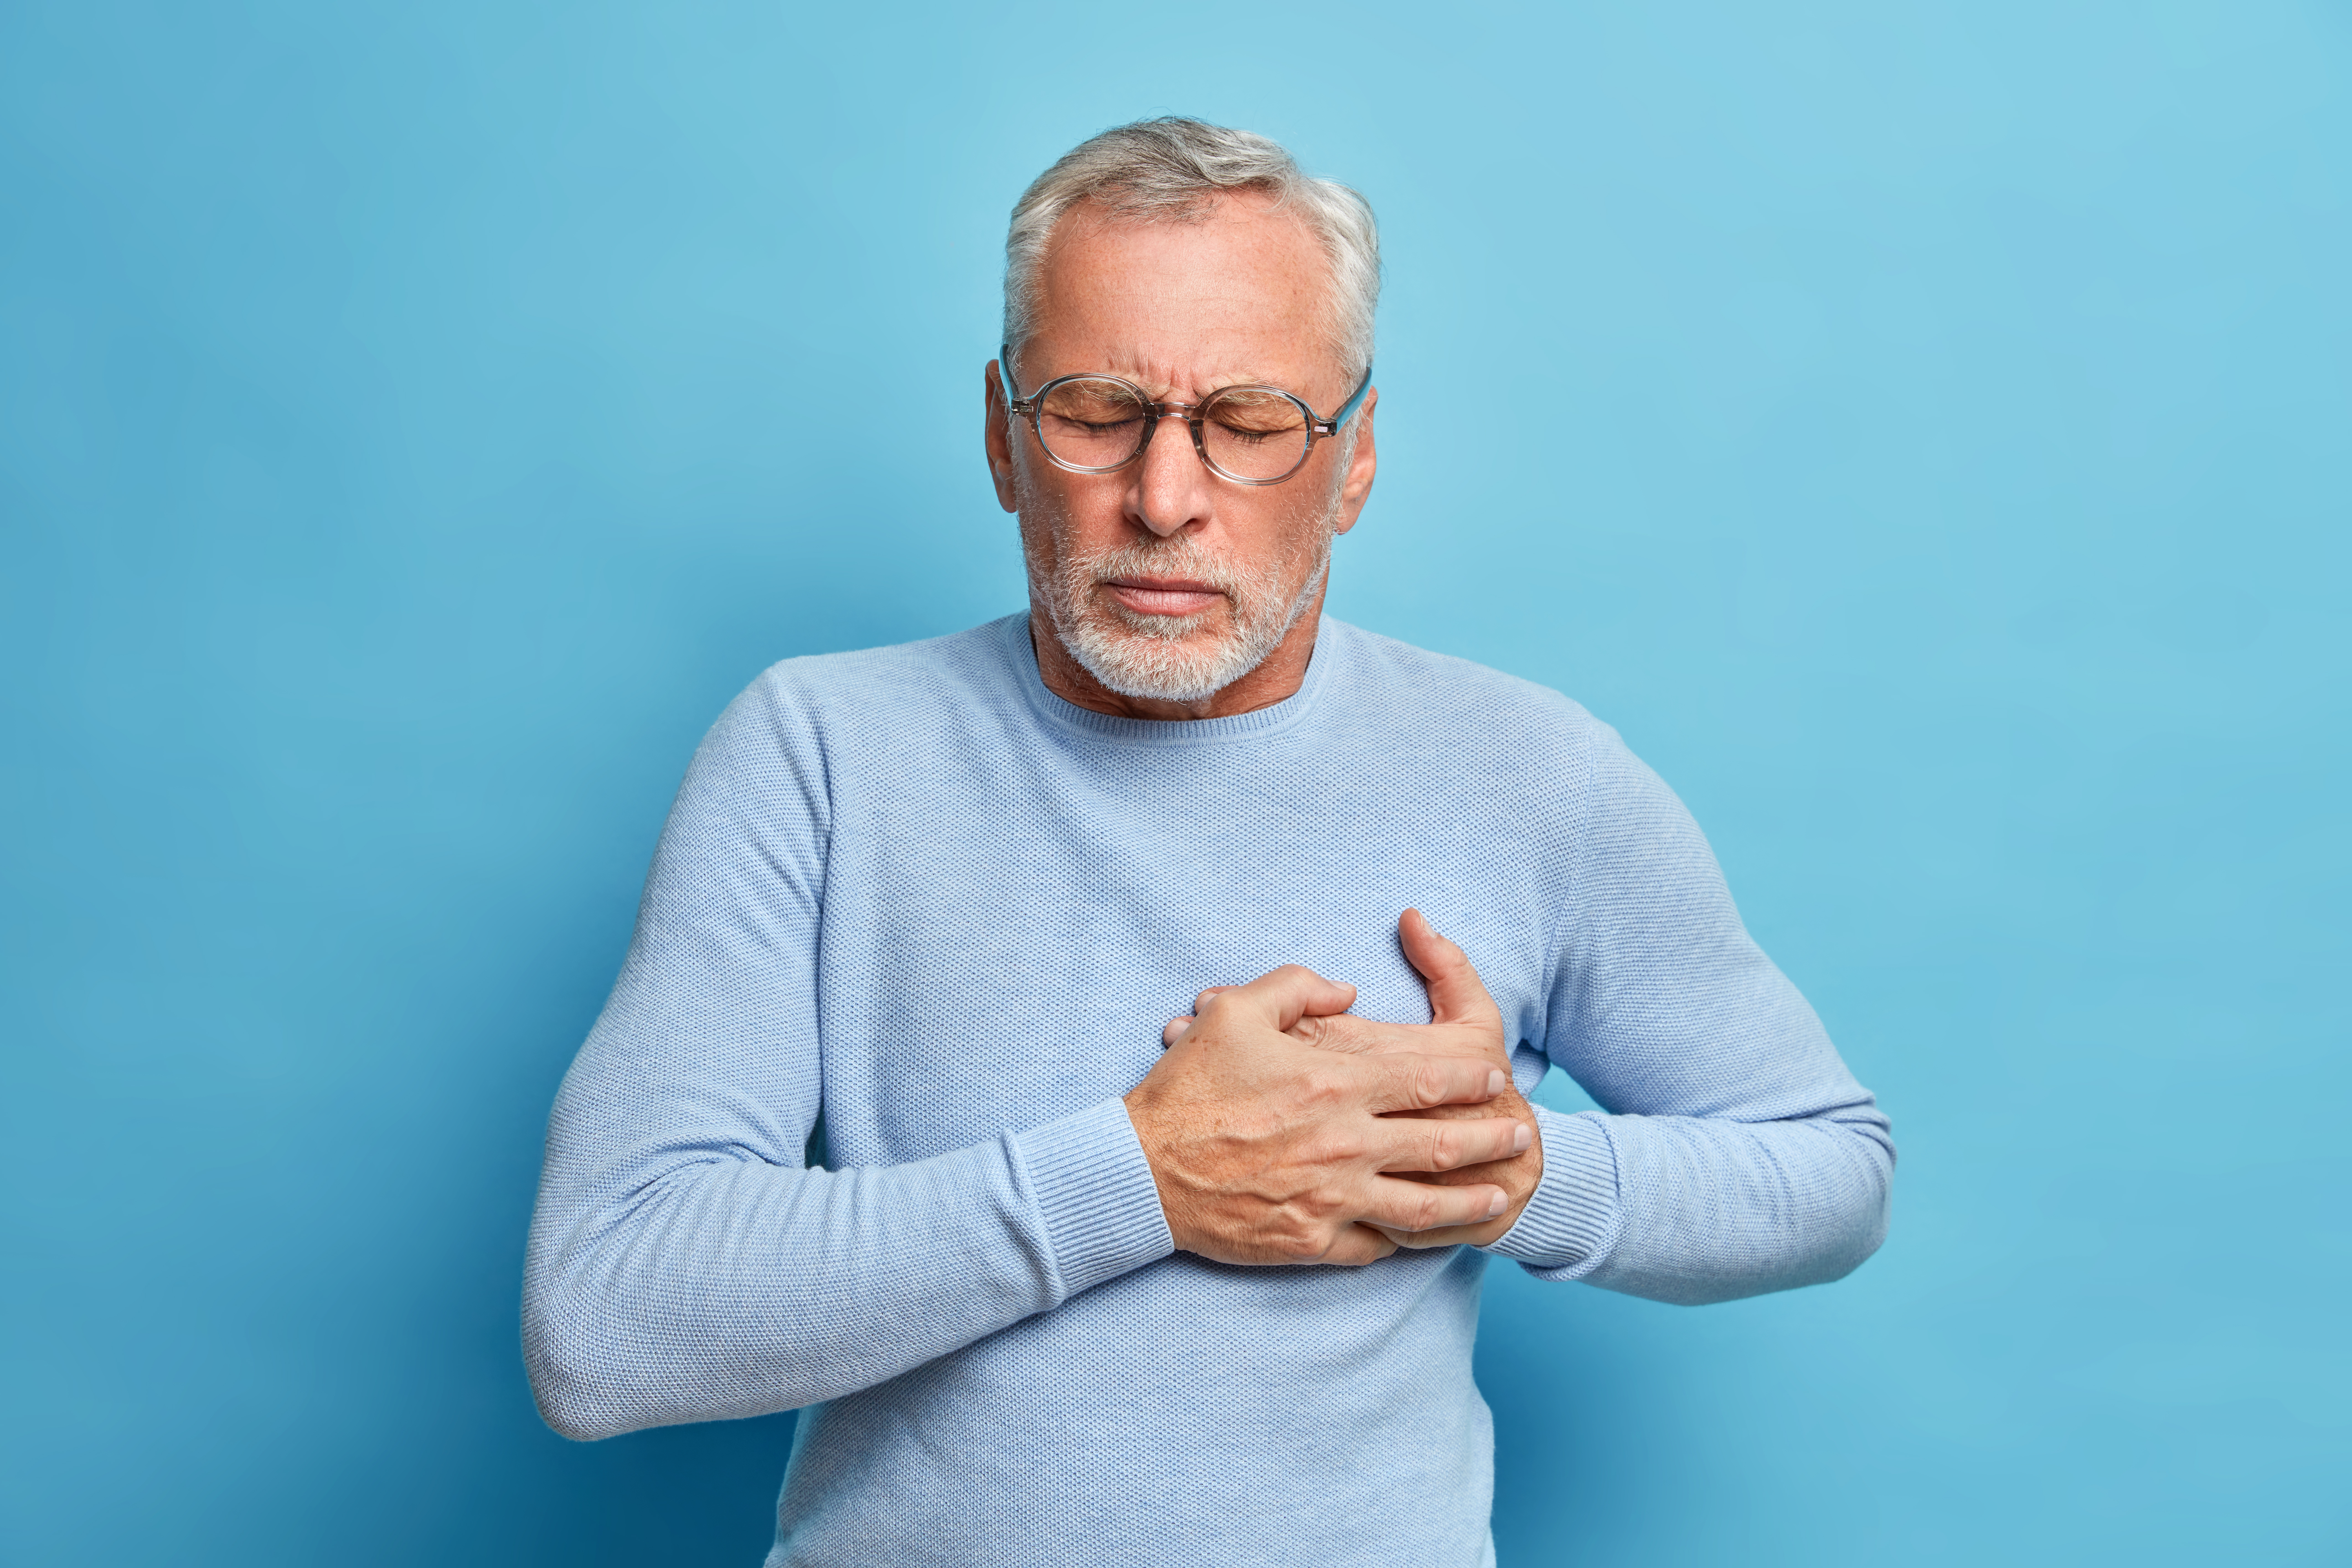 Congestive Heart Failure: What Is, Causes, Symptoms, and Treatment